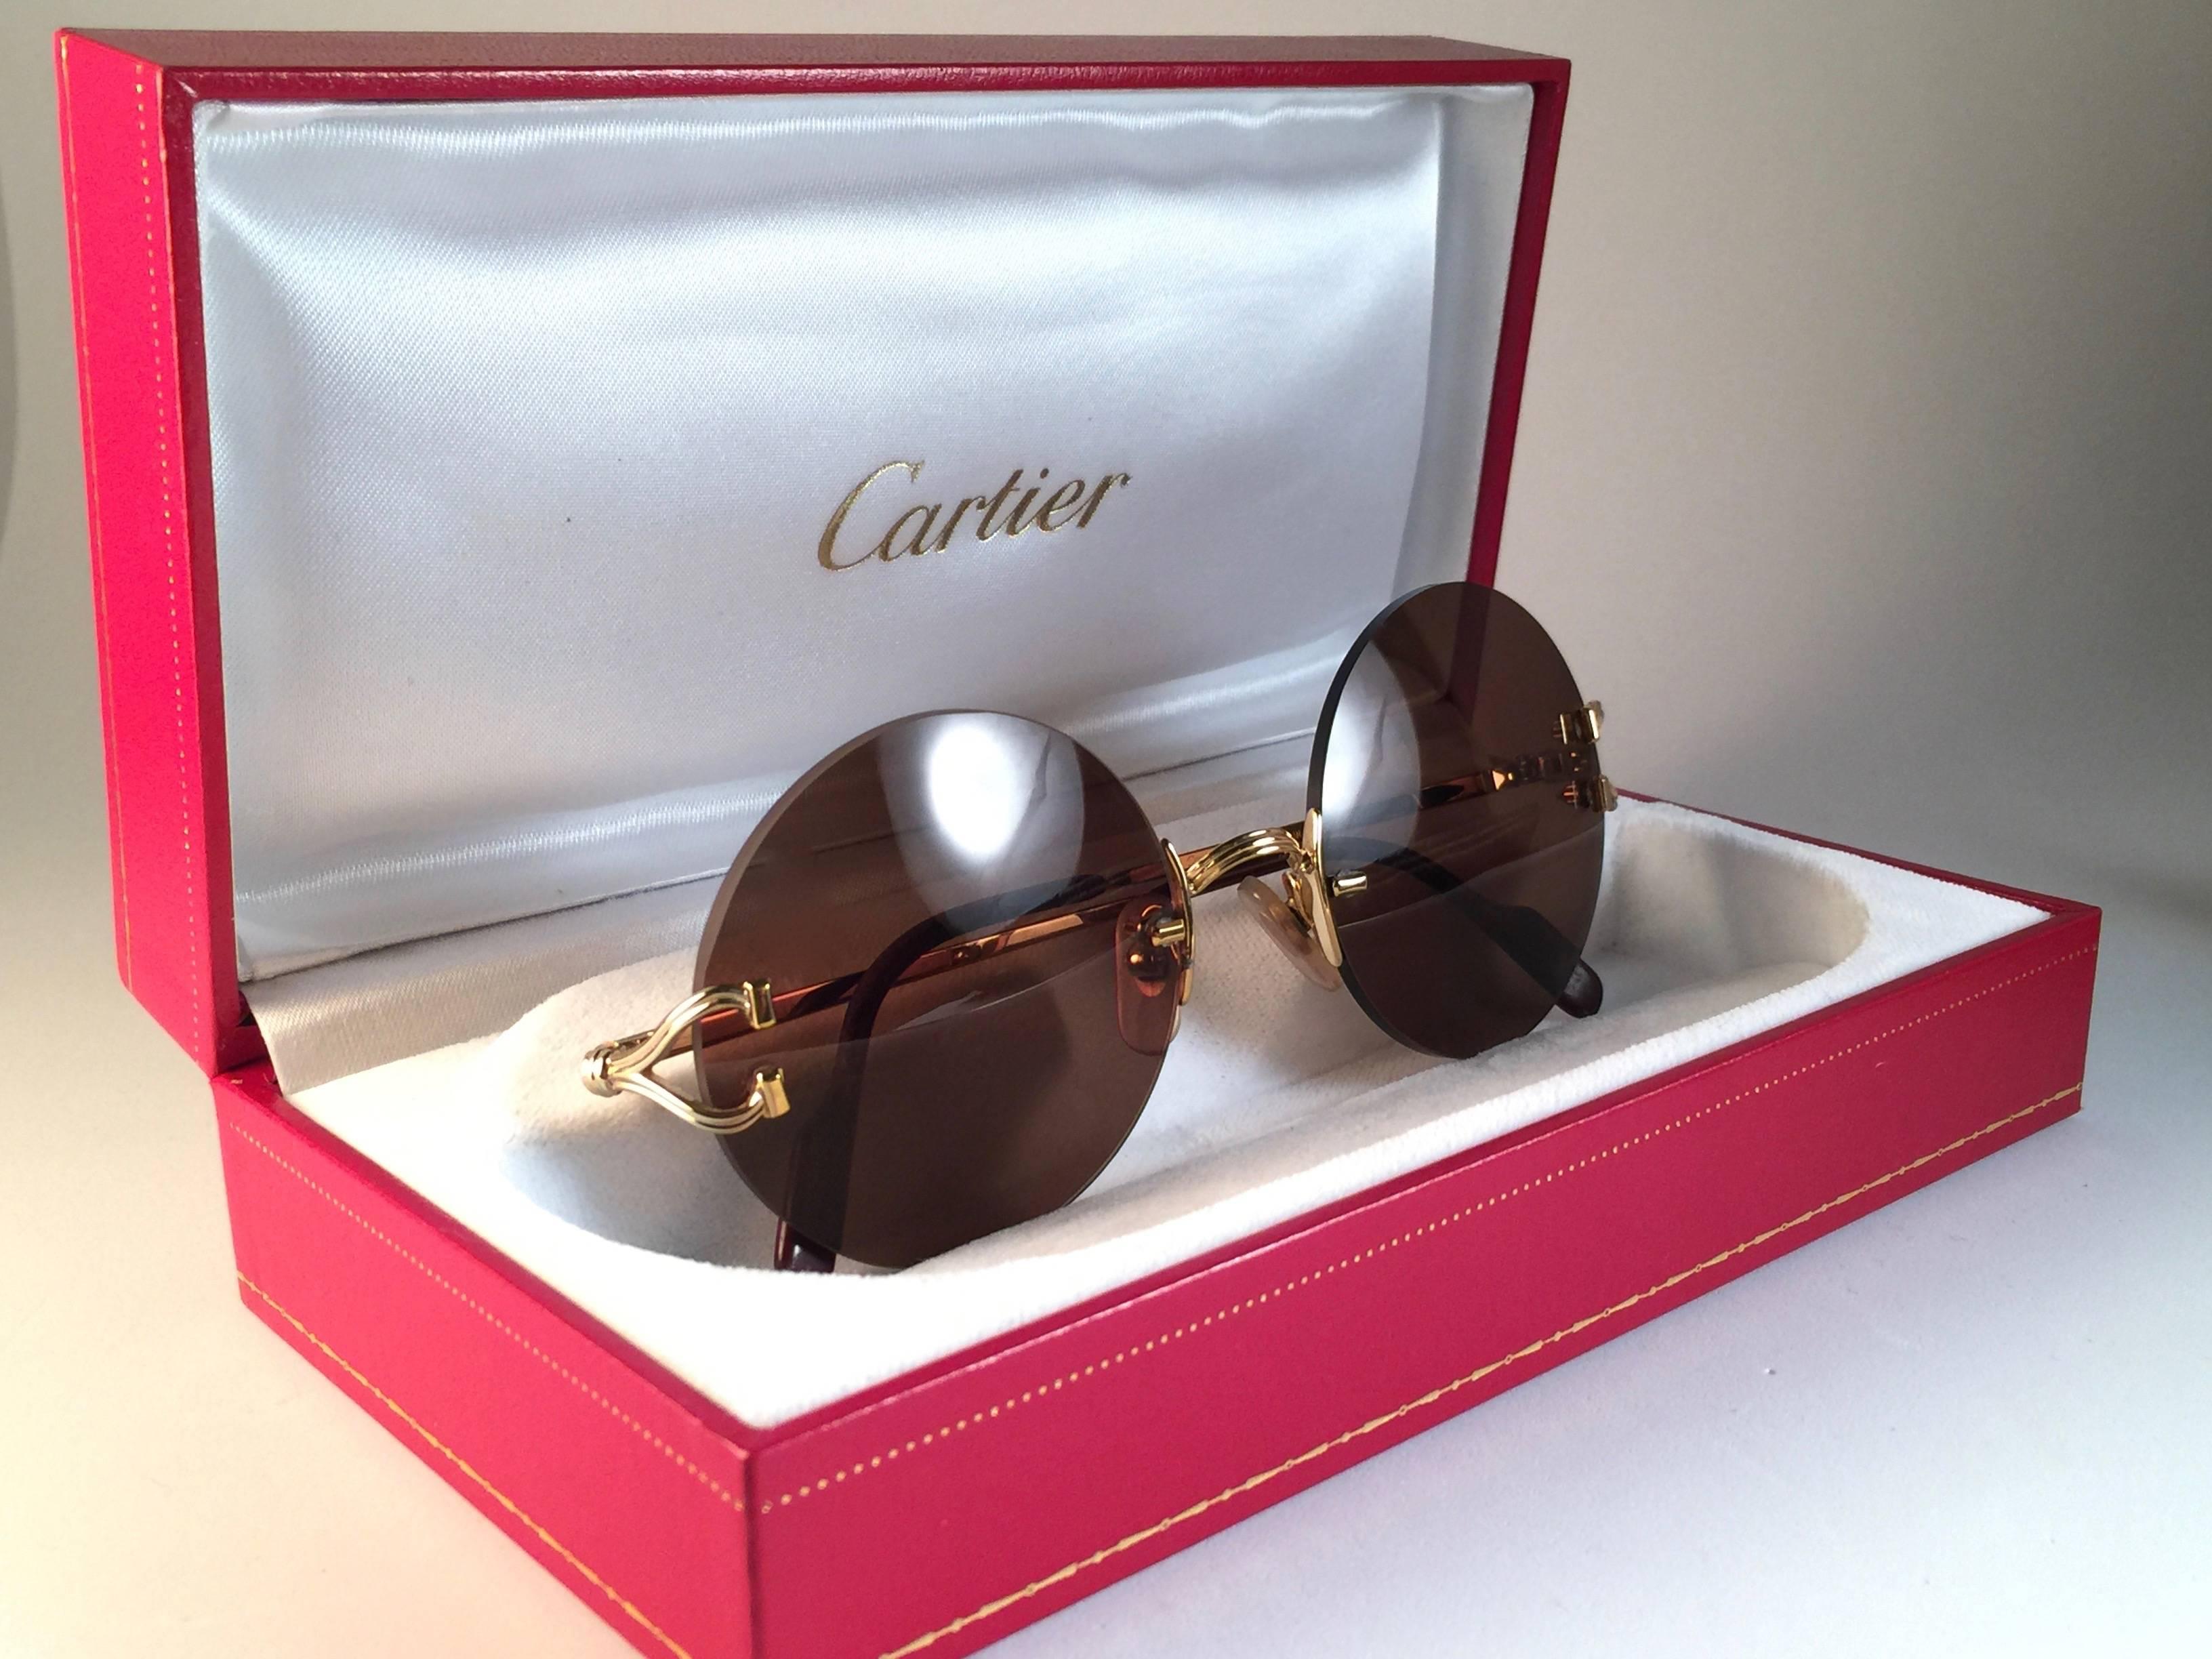 New Cartier Madison unique rimless sunglasses with brown Cartier (uv protection) lenses.  Frame with special details on the front and sides in gold. 
All hallmarks. Cartier gold signs on the black ear paddles.  
These are like a pair of jewels on